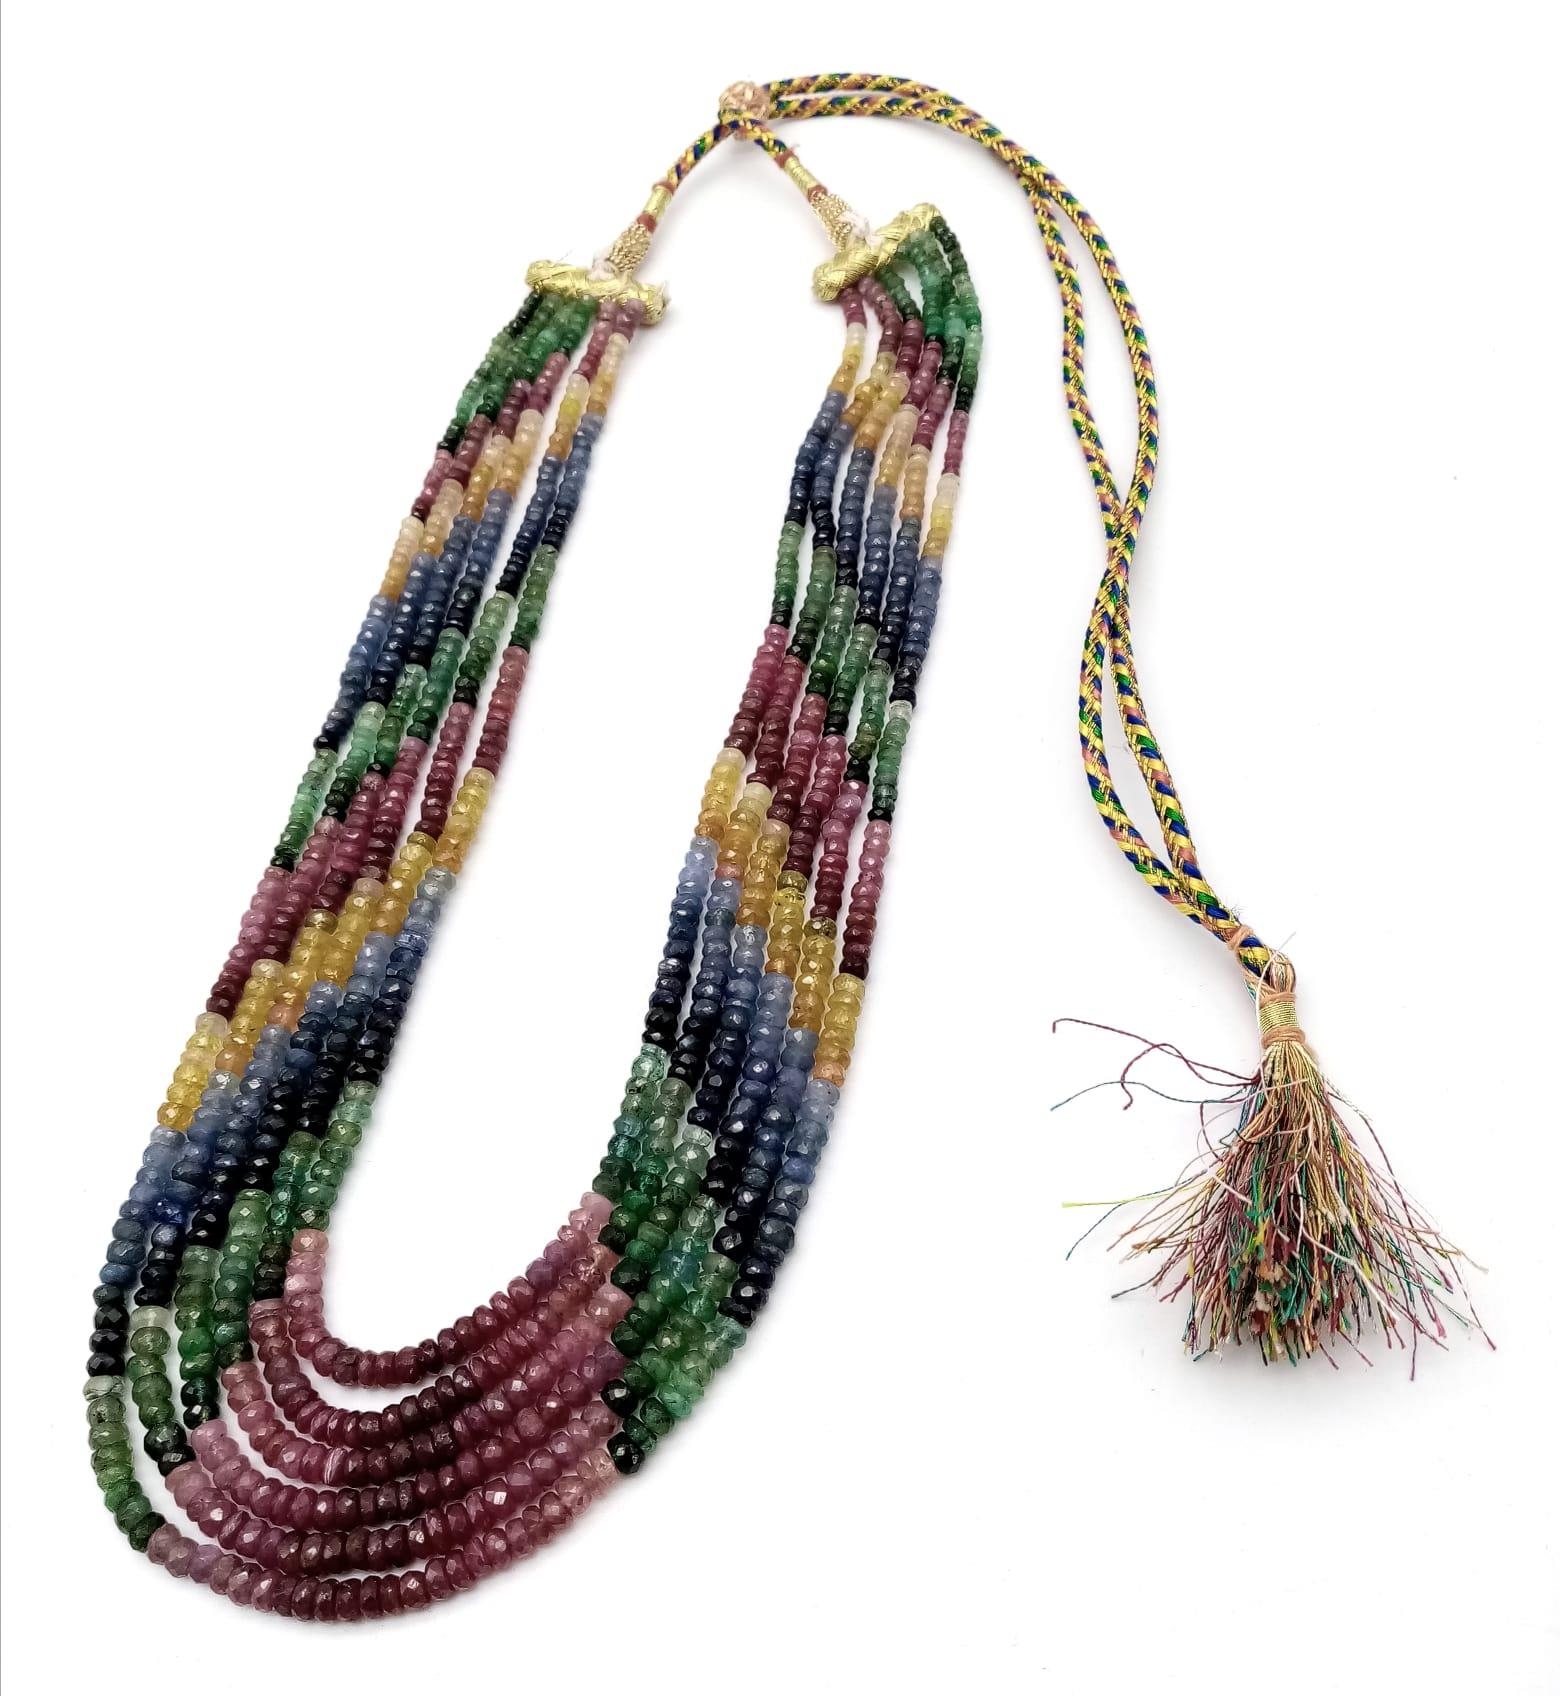 A fabulous 420ctw Ruby, Emerald and Sapphire multi-strain necklace with Asian embroidered - Image 3 of 5